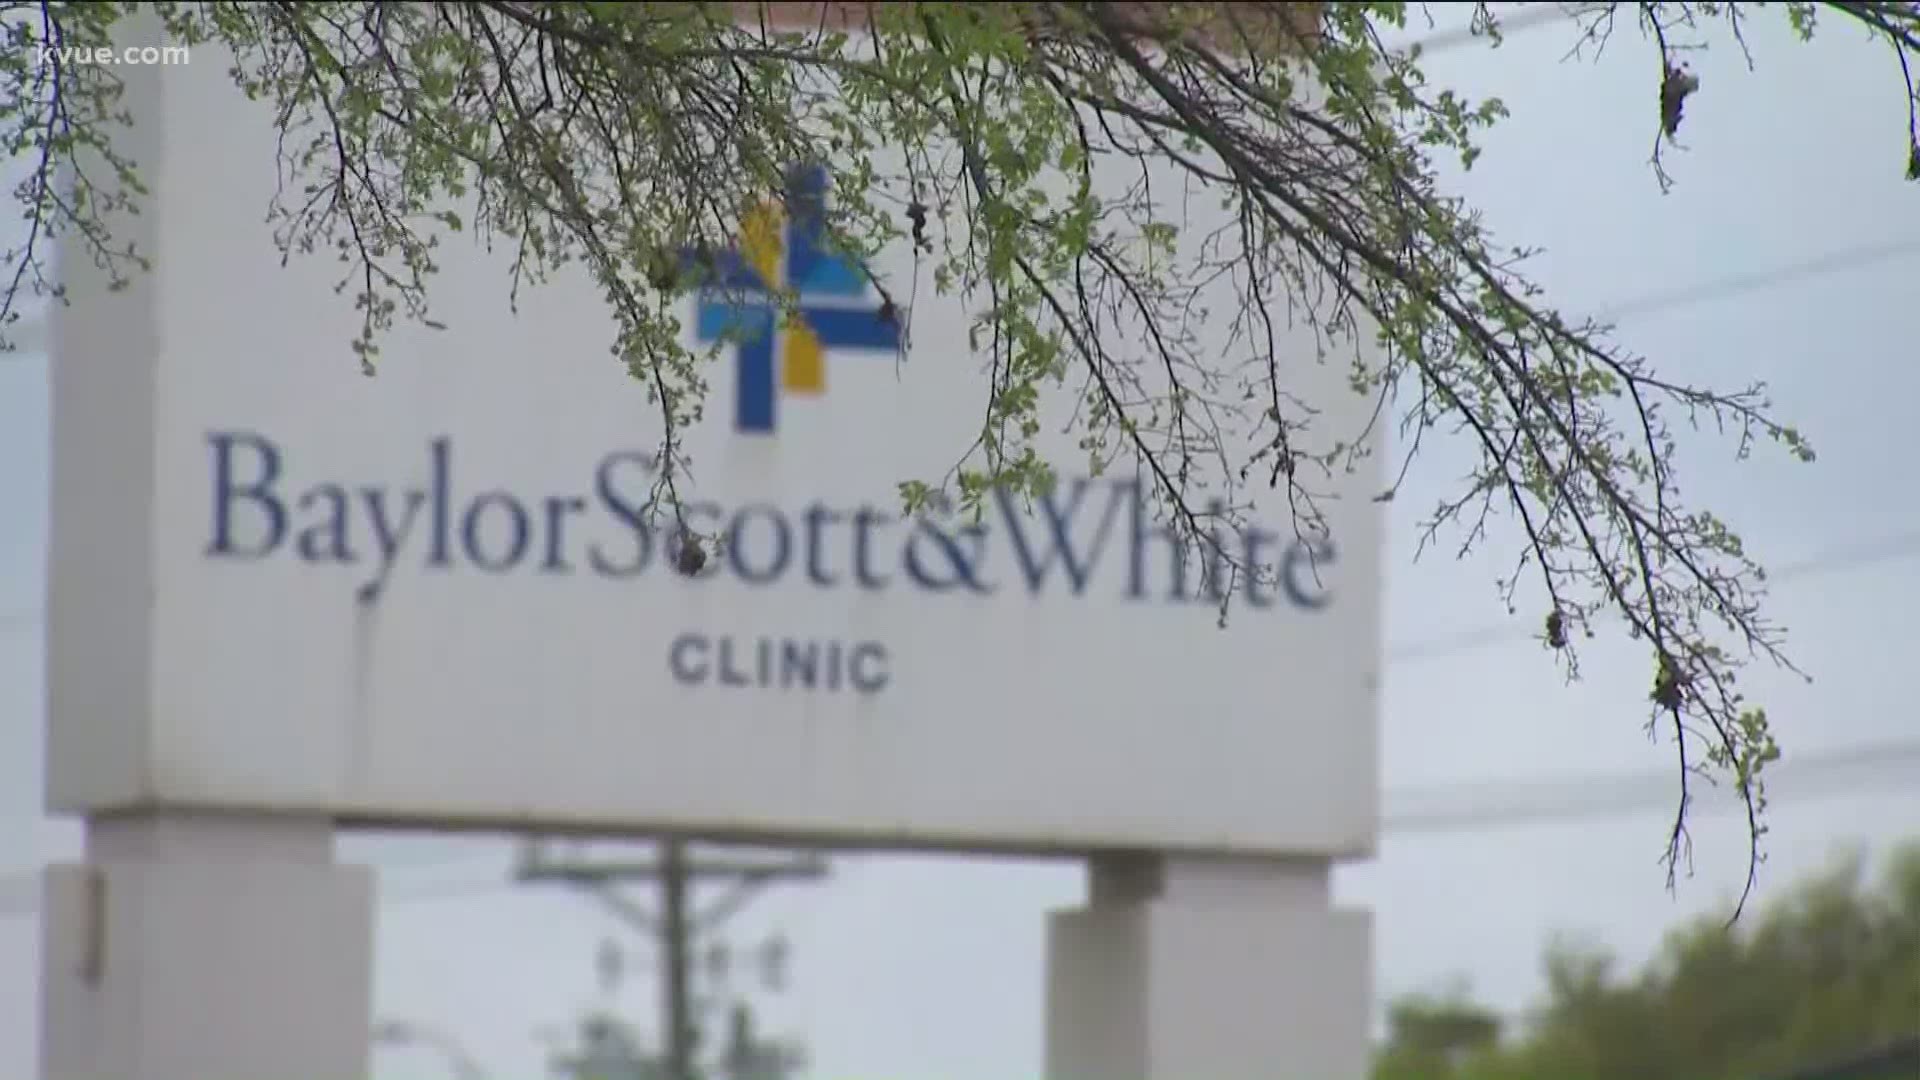 Baylor Scott & White is laying off 1,200 employees. Other employees will be furloughed or have their pay cut.